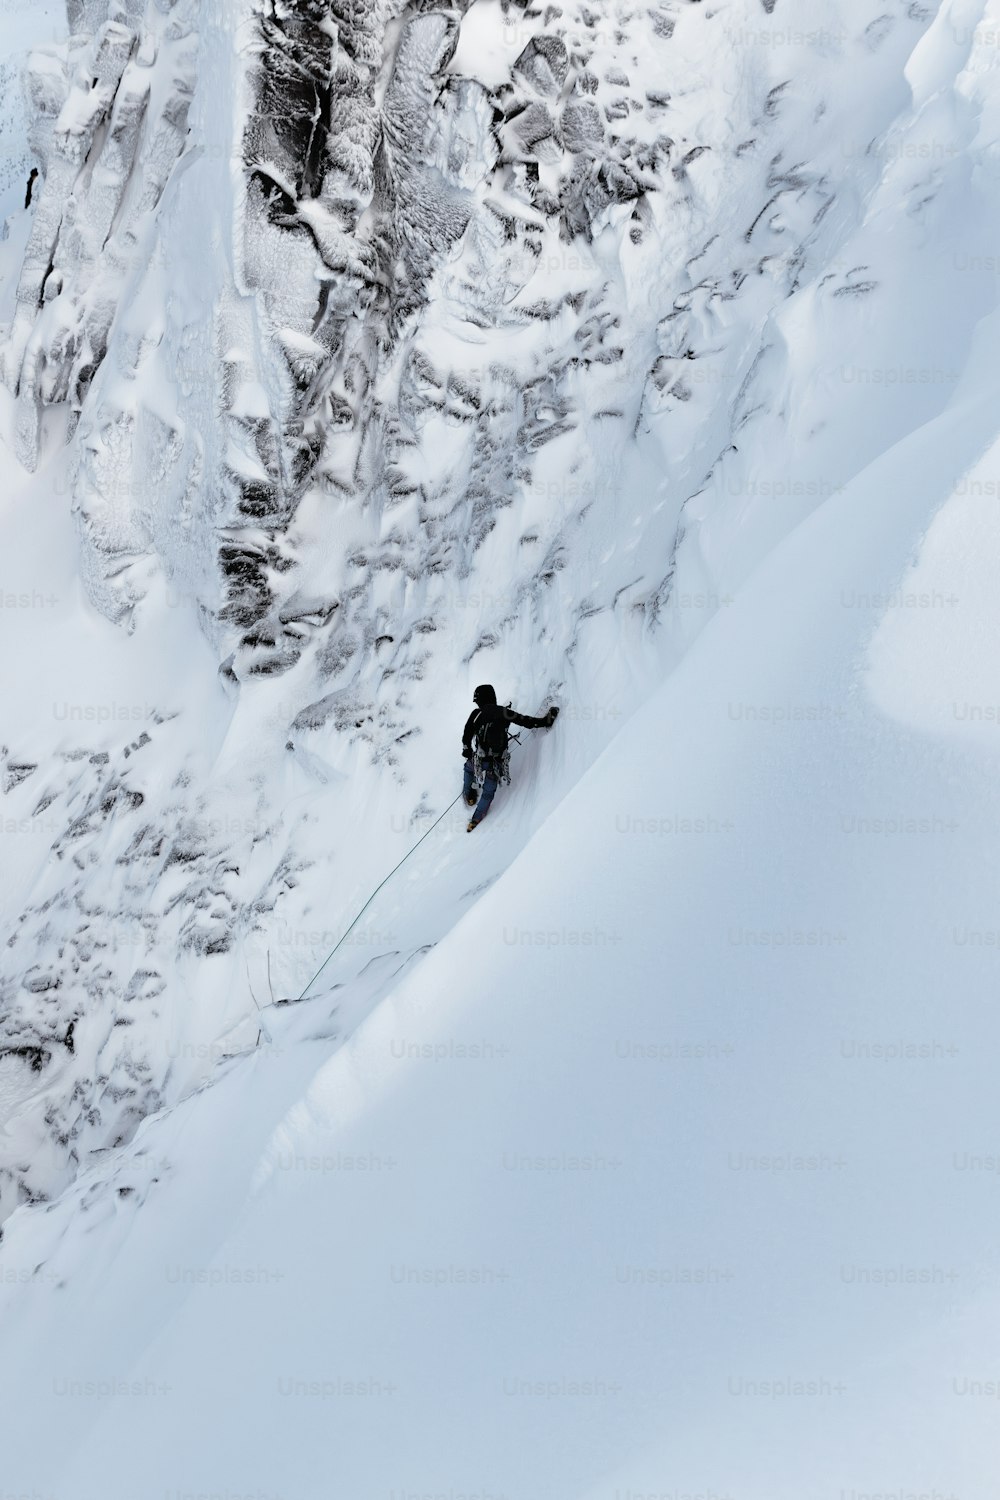 a person skiing down a snowy mountain side